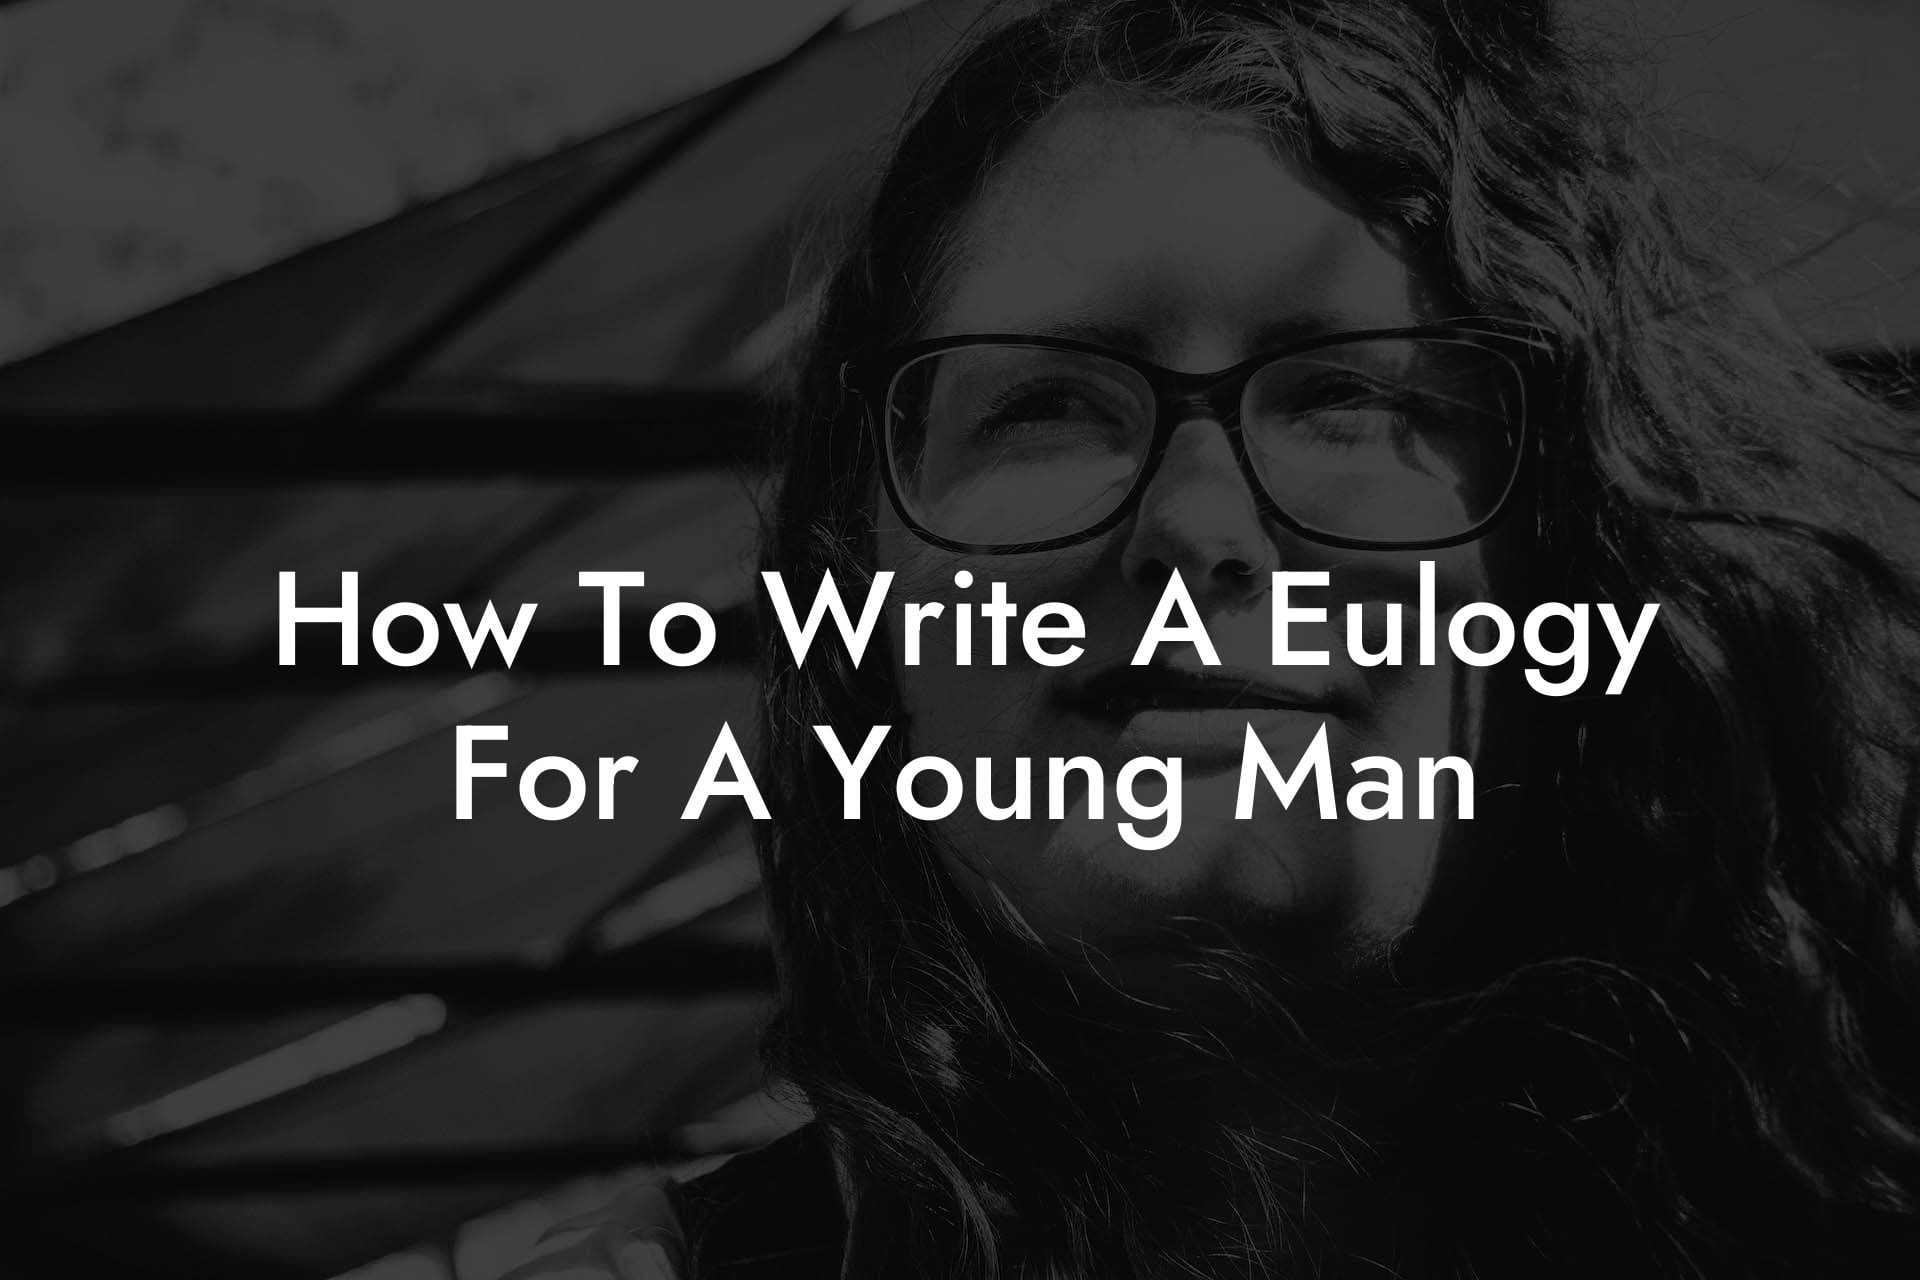 How To Write A Eulogy For A Young Man